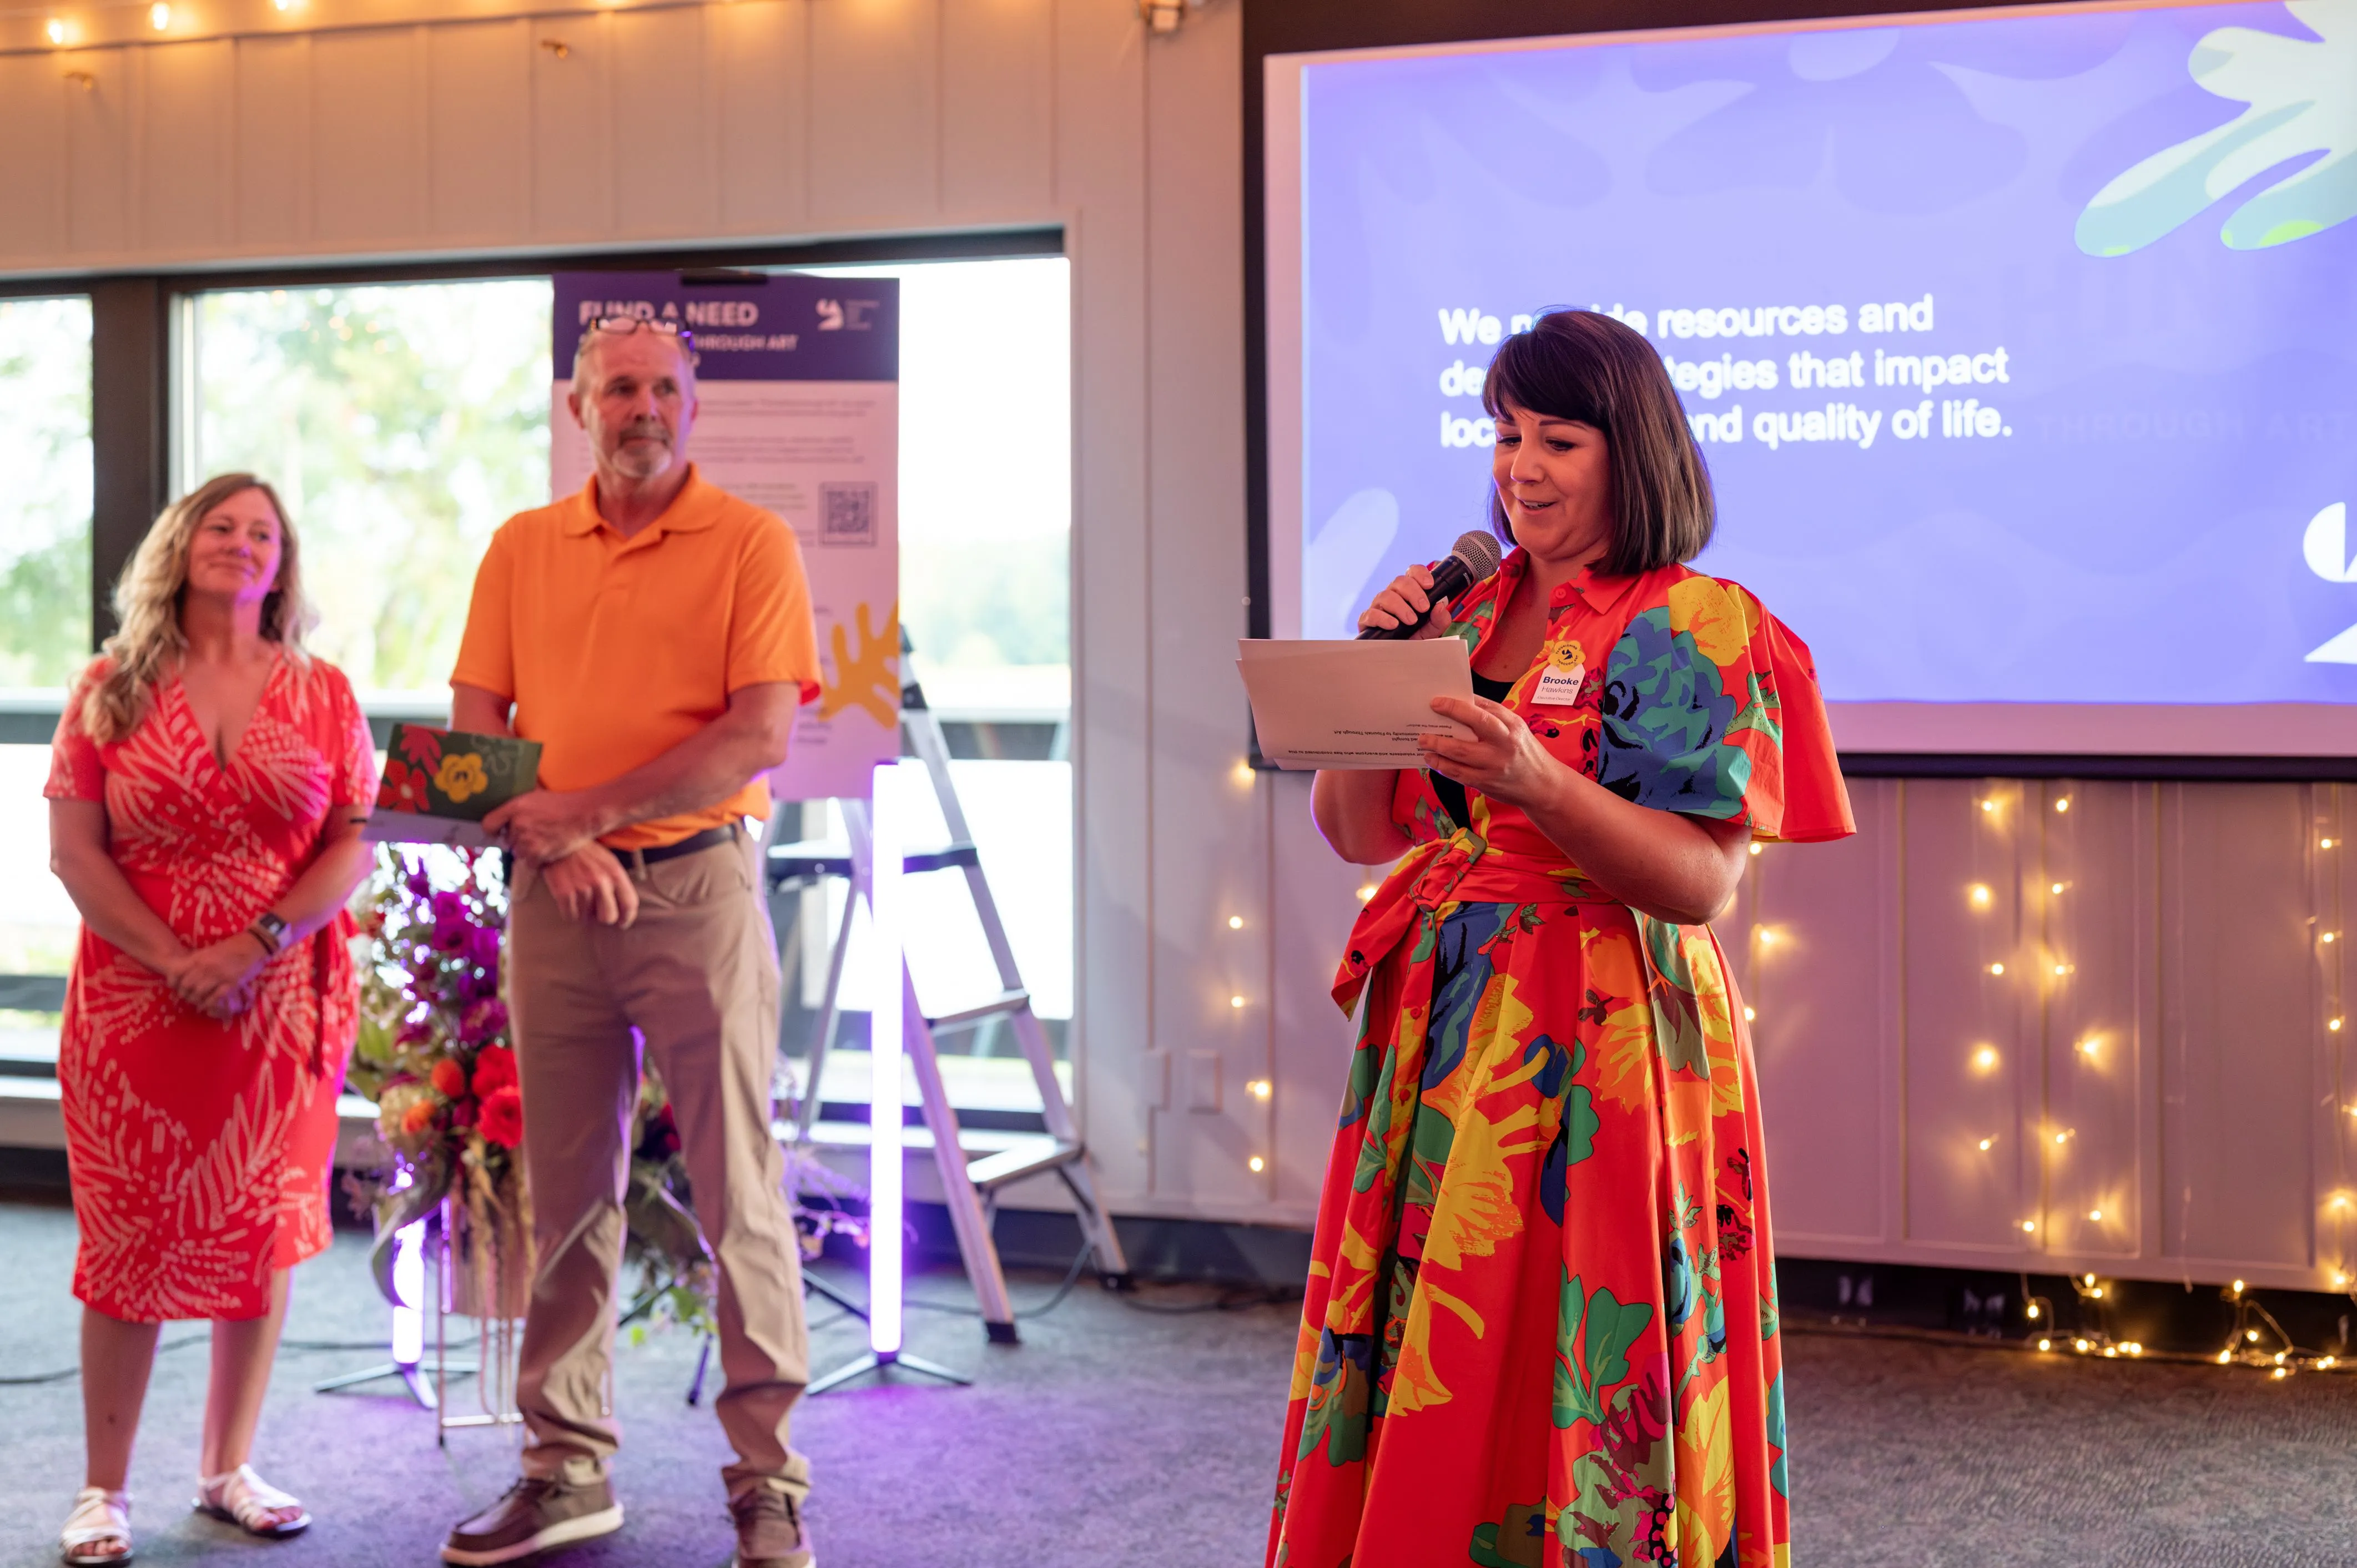 Three people at an indoor event with one of them reading from a paper and a projection screen in the background displaying text and a floral graphic.